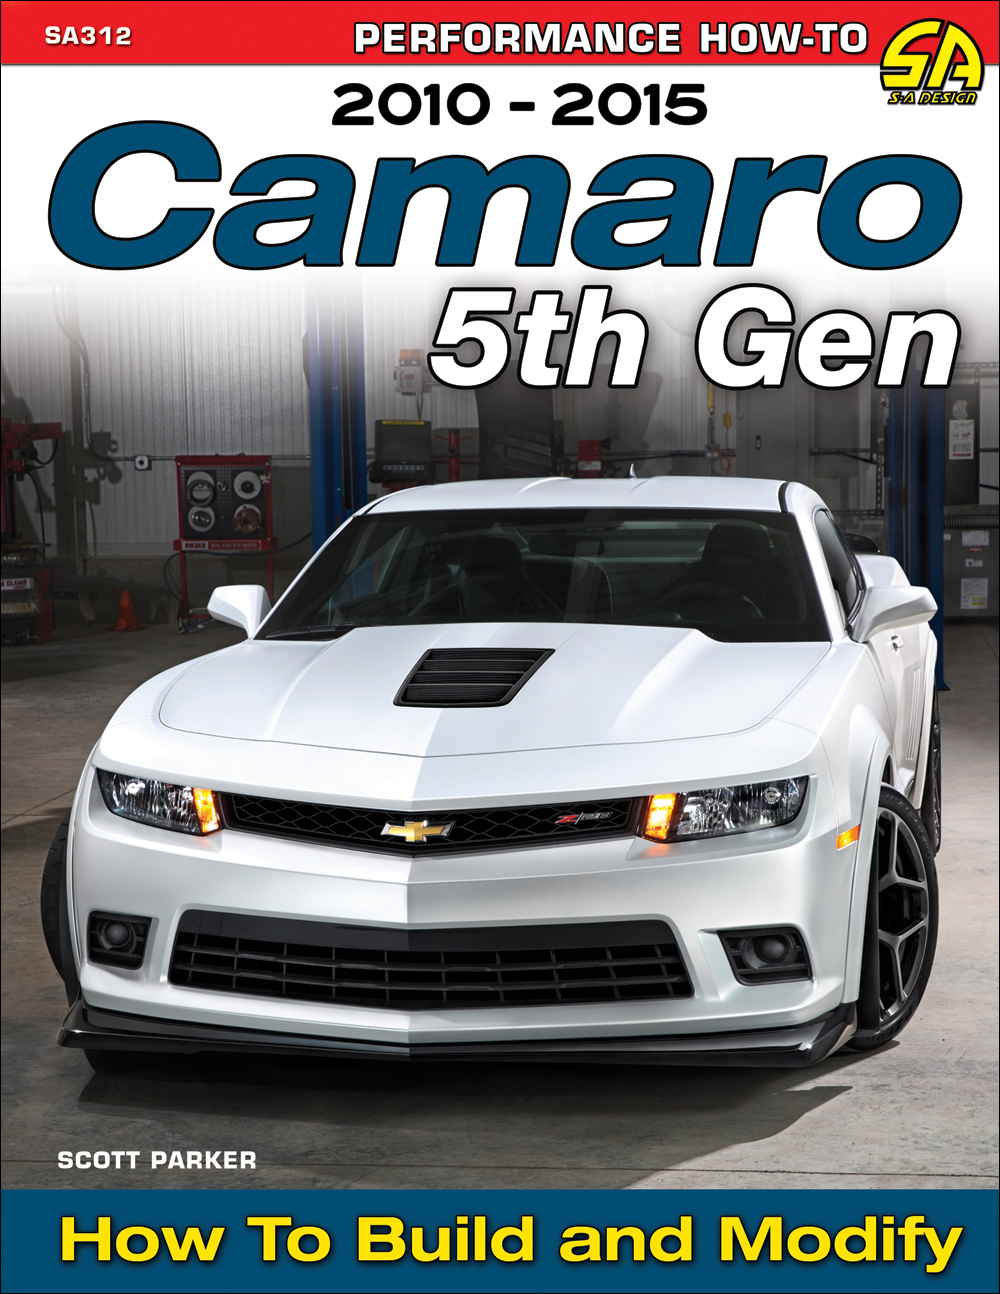 2010-2015 How to Build and Modify Camaro 5th Gen